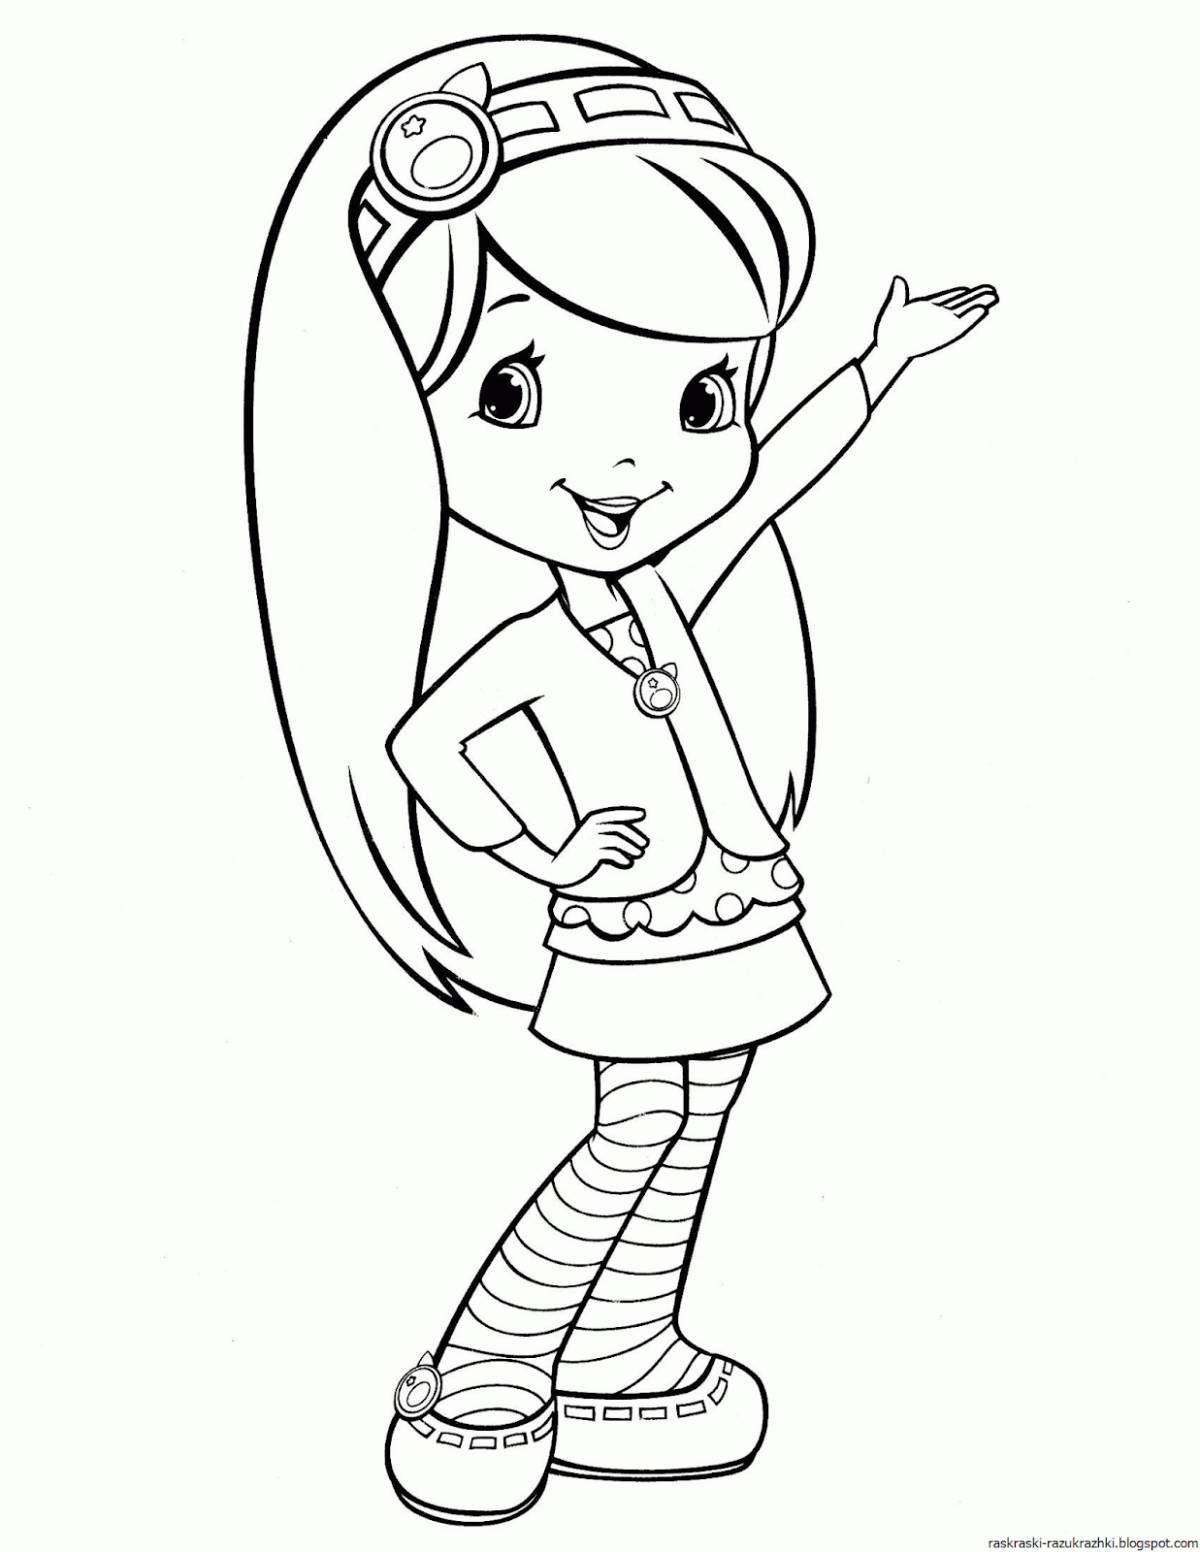 Outstanding coloring pages for girls